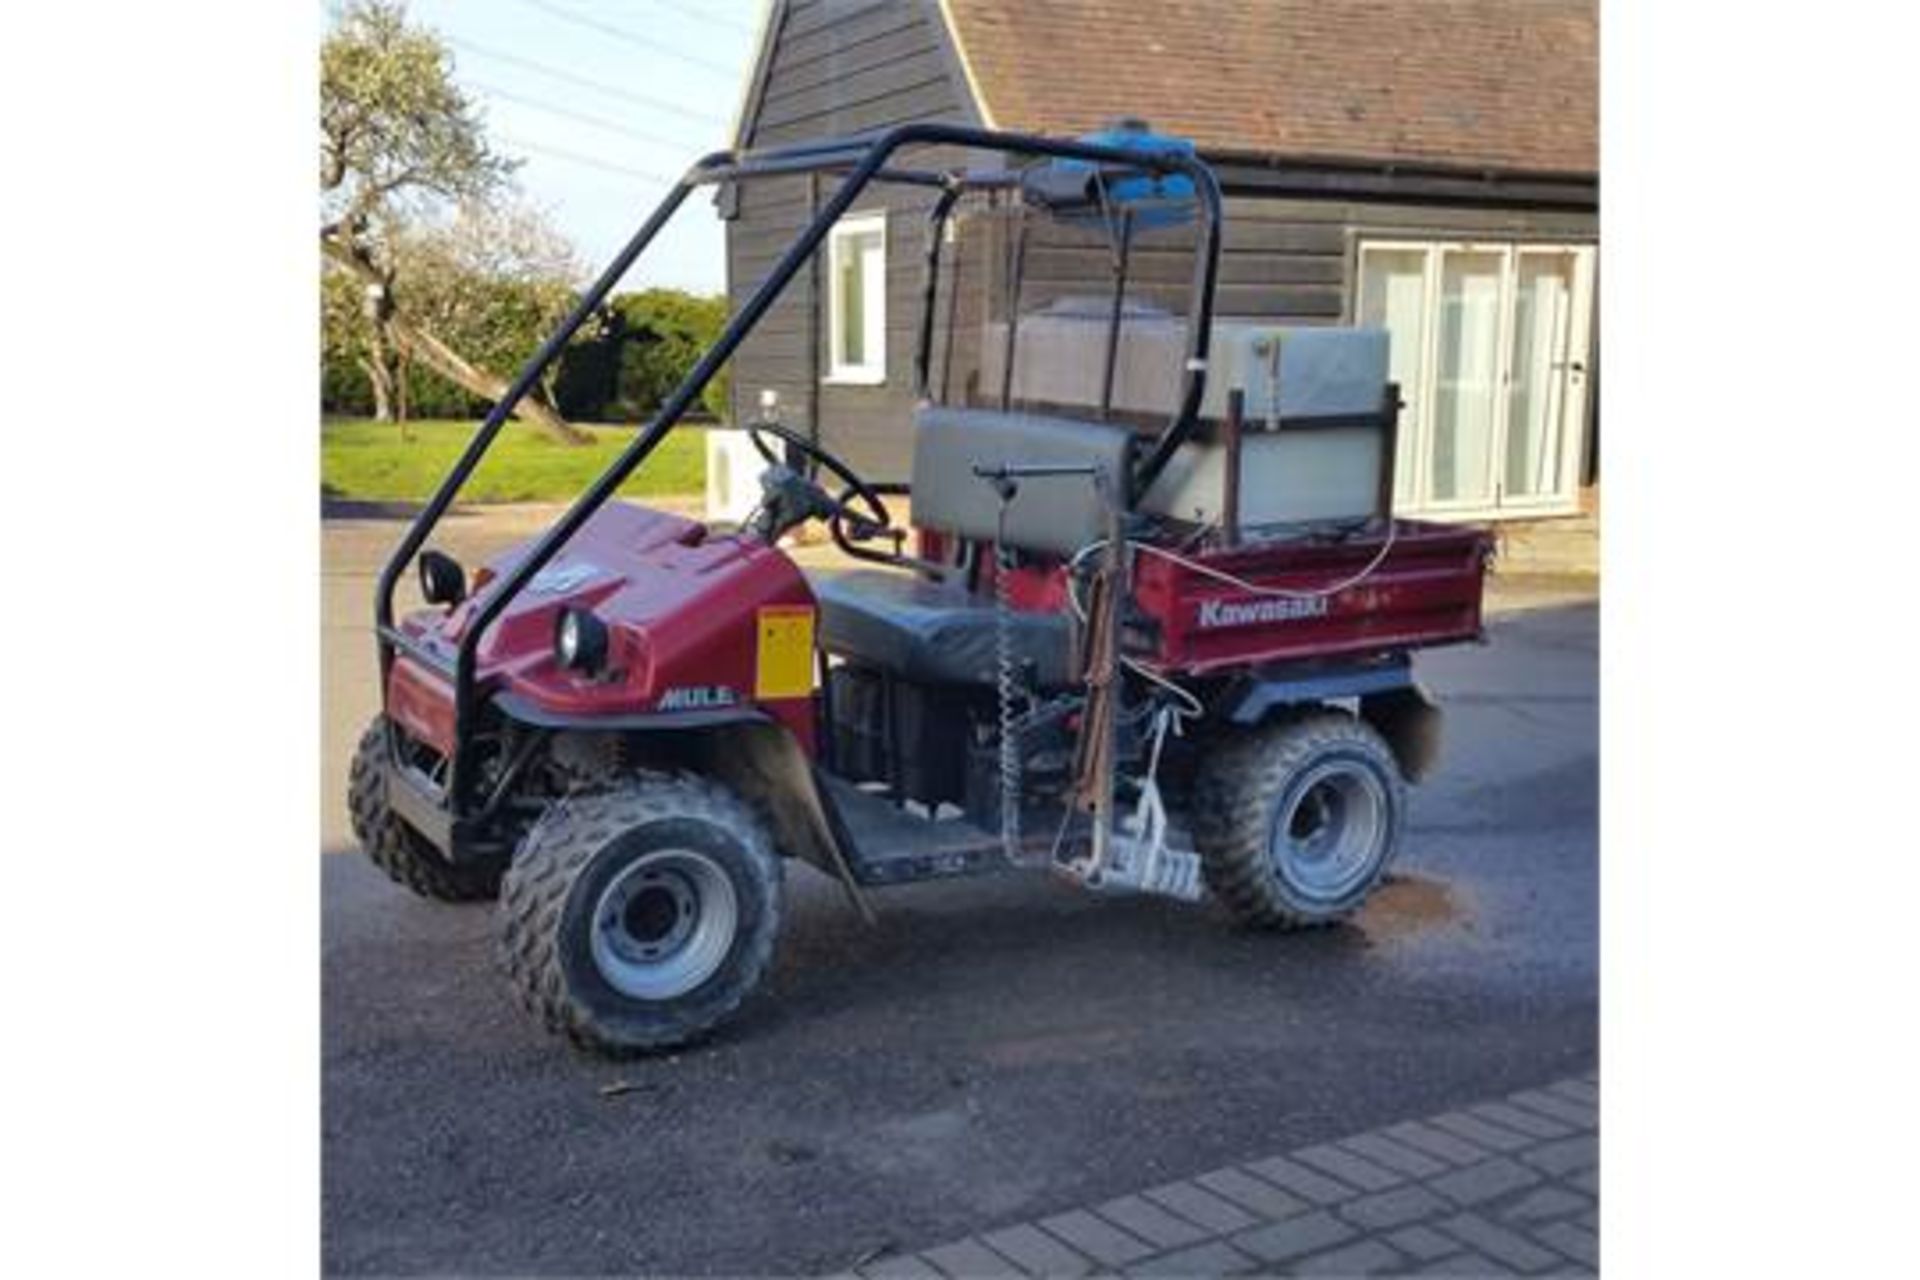 Kawasaki Mule 550 Petrol single cylinder Hours 586 from new Only used for line marking White line